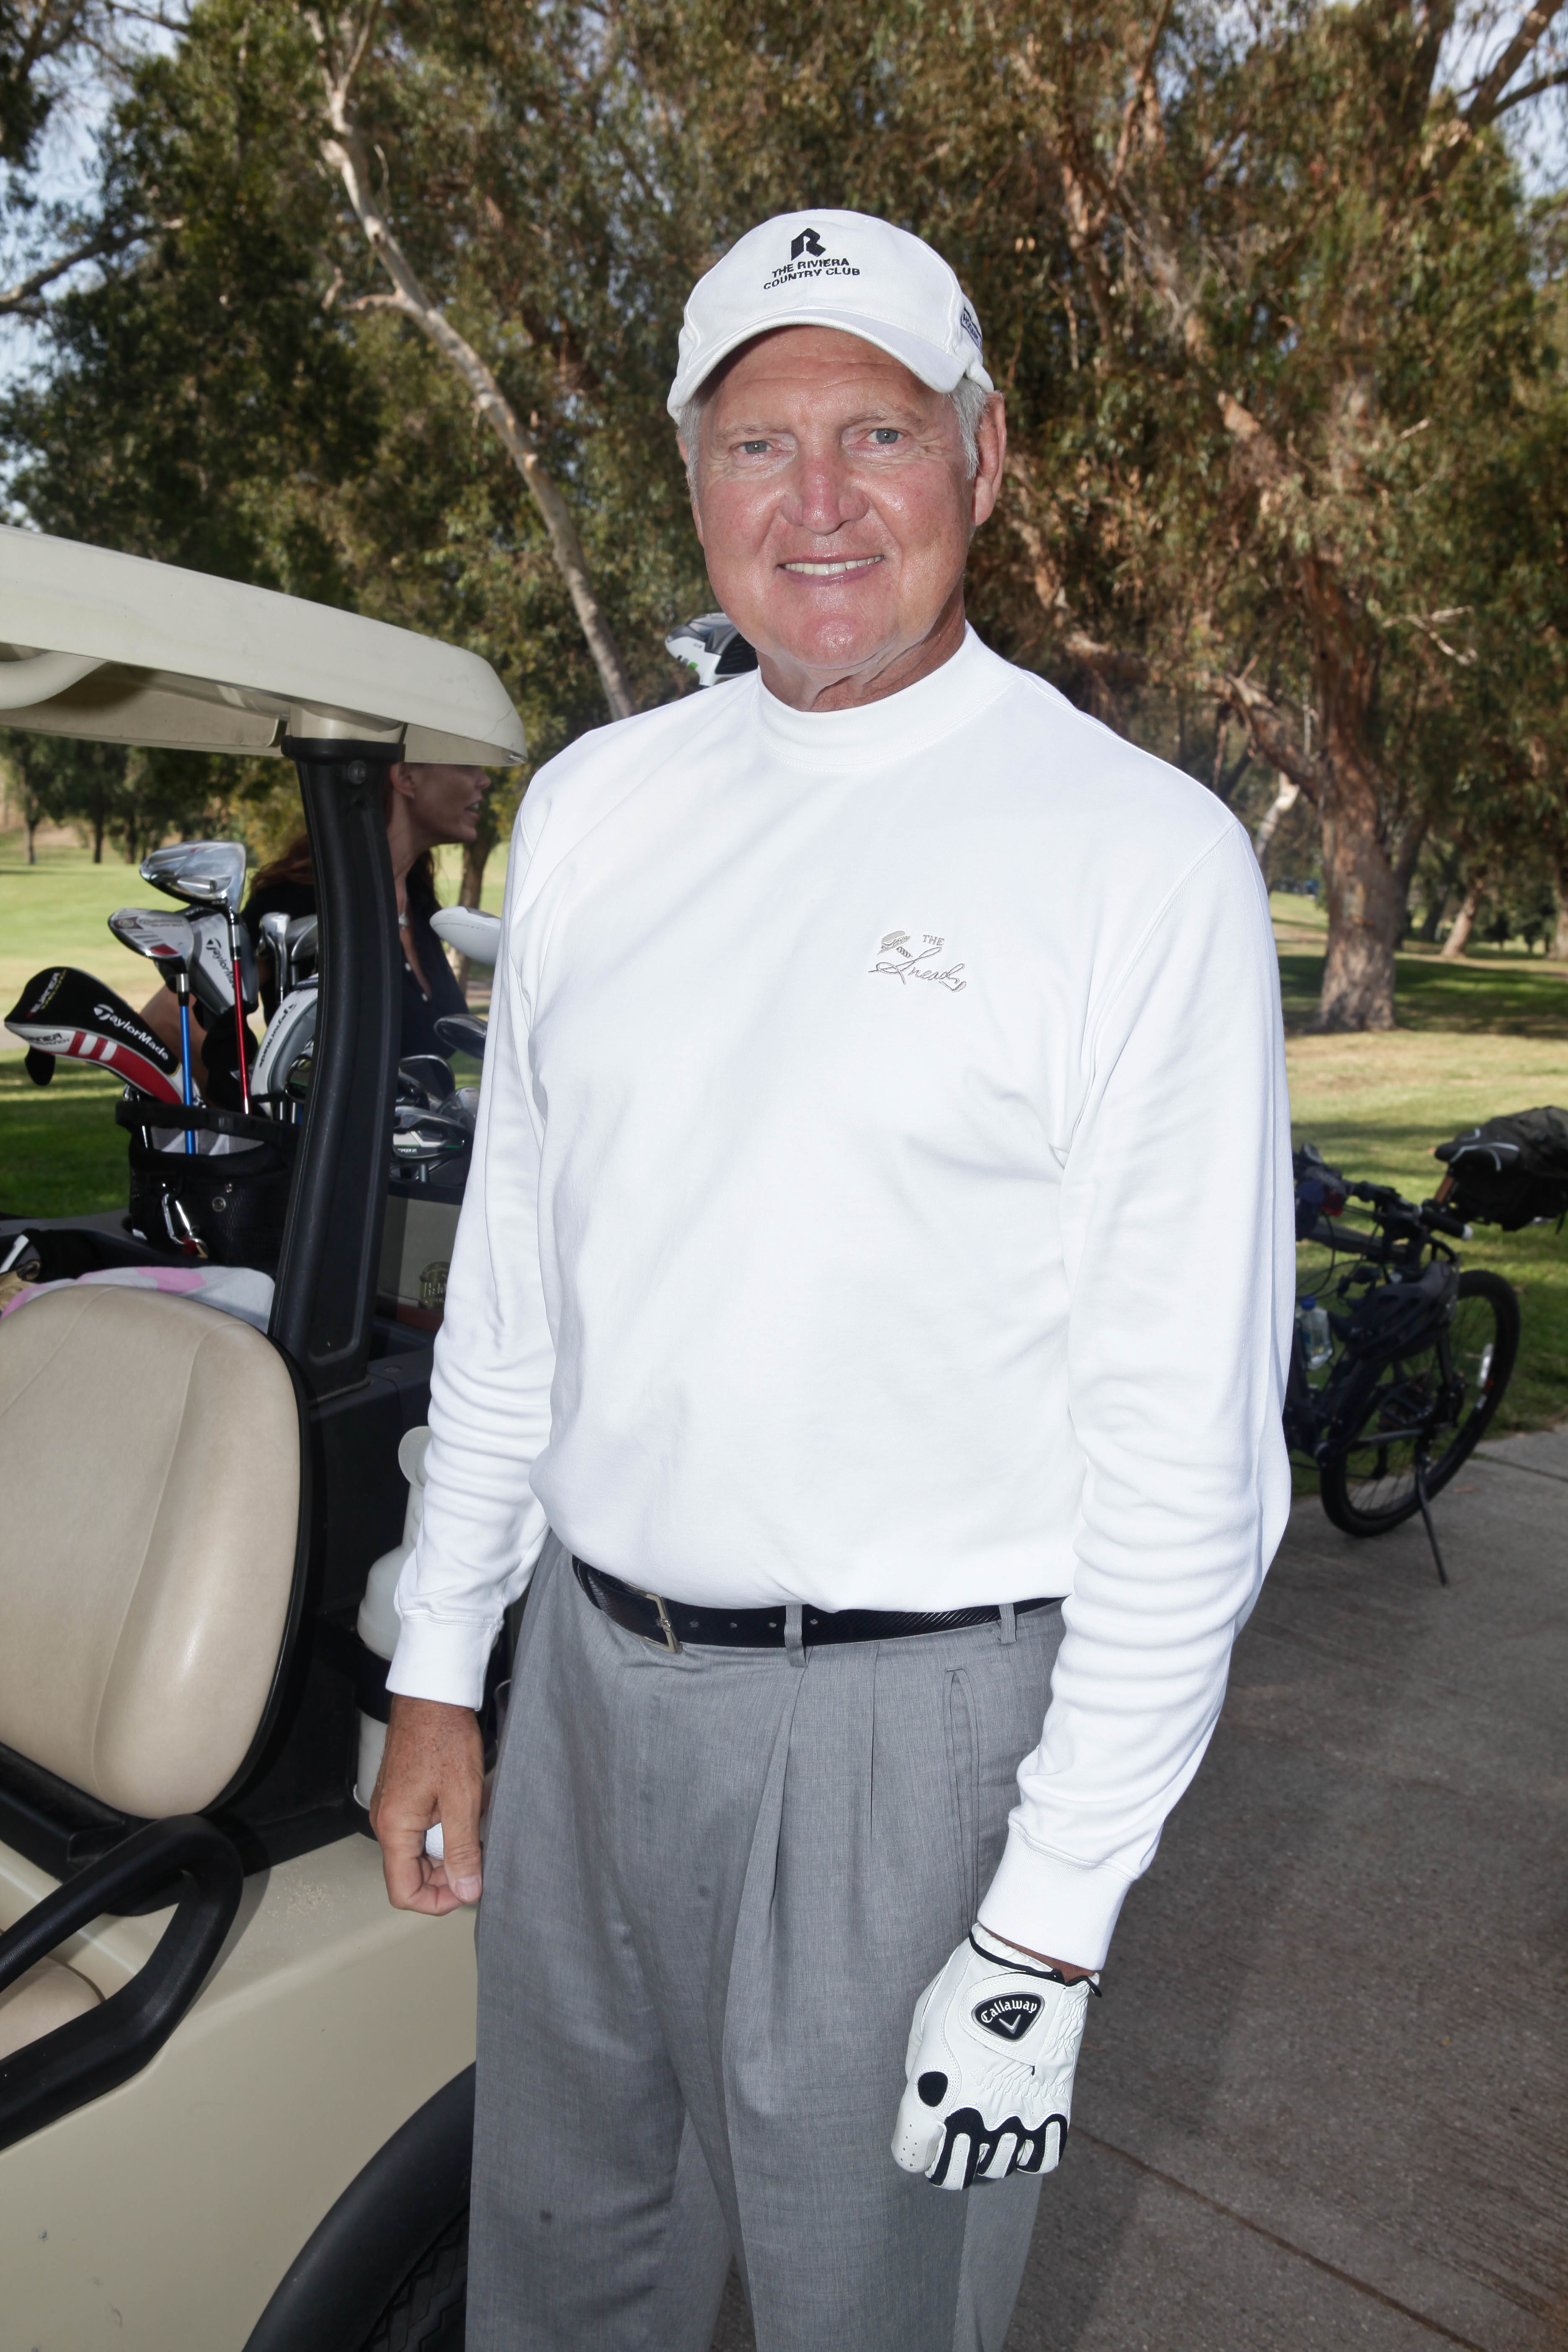 Golfer standing with golf cart, wearing a white long-sleeve shirt, gray pants, and glove, ready to play